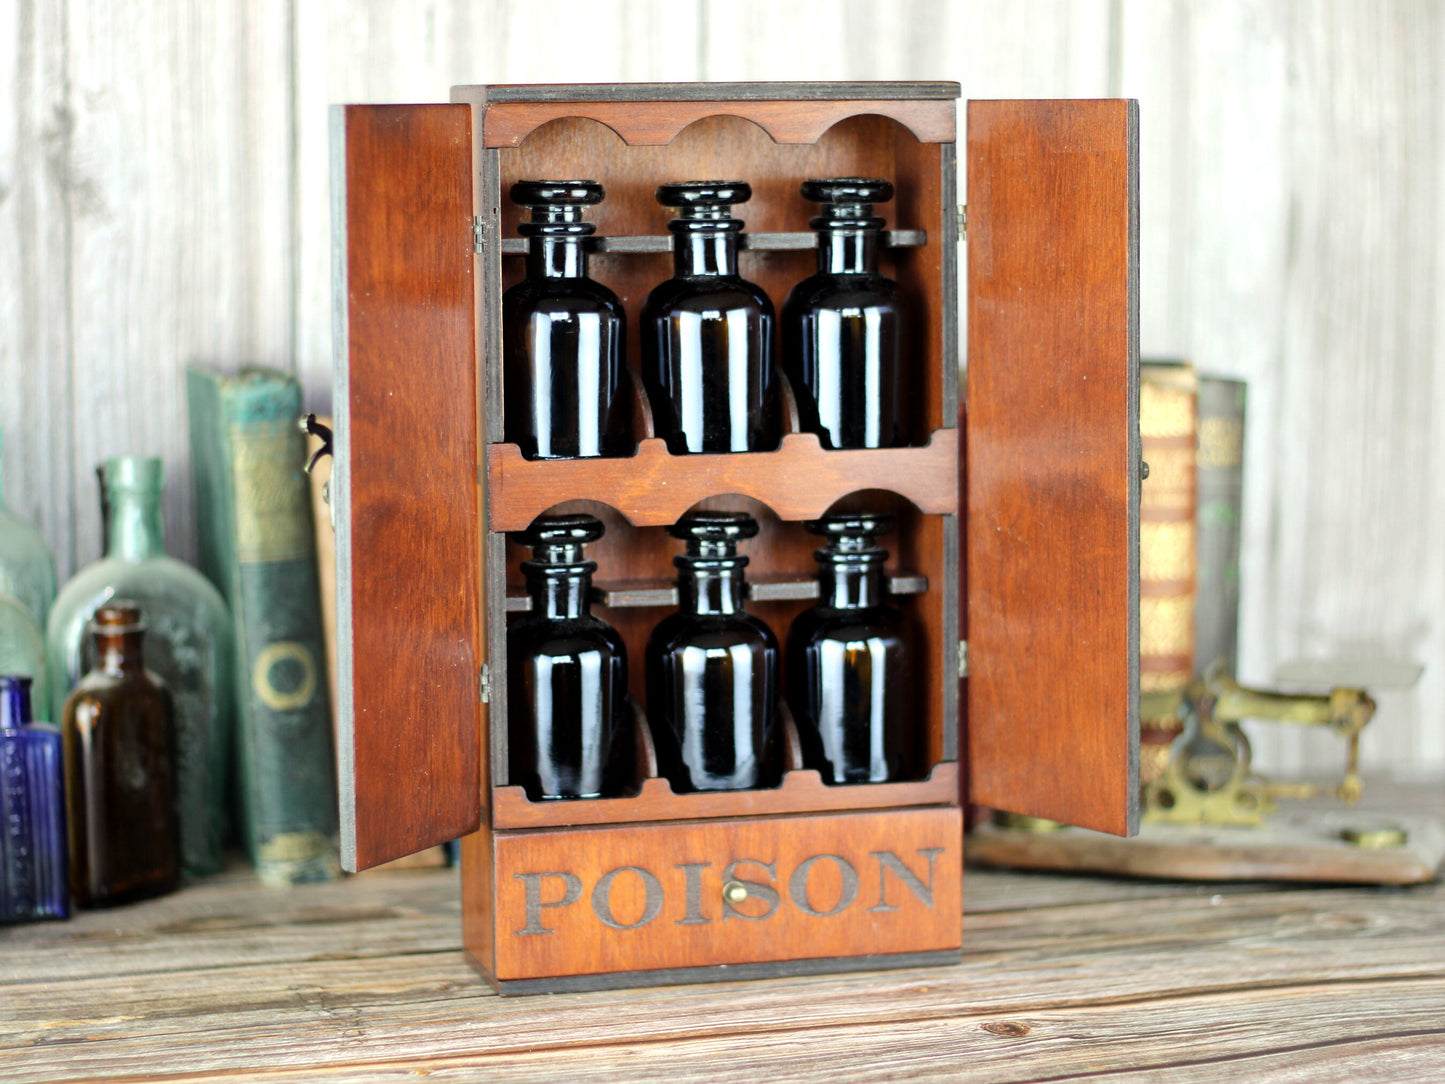 Wooden apothecary cabinet with skull engraving and poison drawer holds six brown medicine bottles with glass stoppers